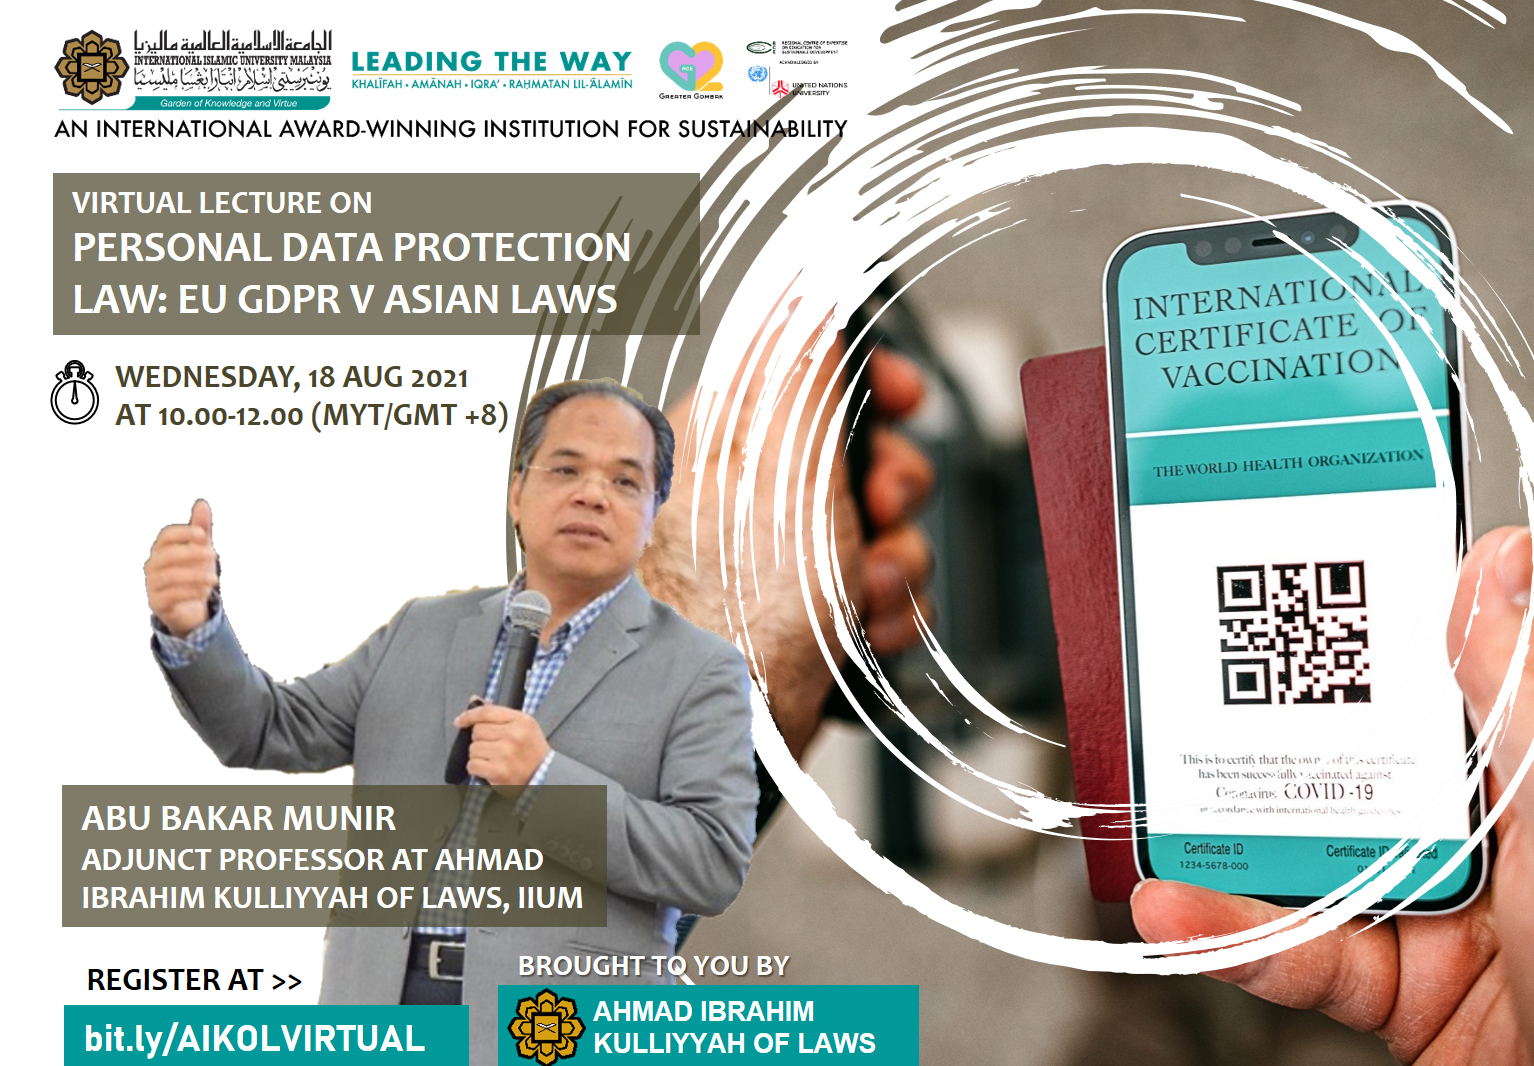 VIRTUAL LECTURE ON PERSONAL DATA PROTECTION LAW: EU GDPR V ASIAN LAWS